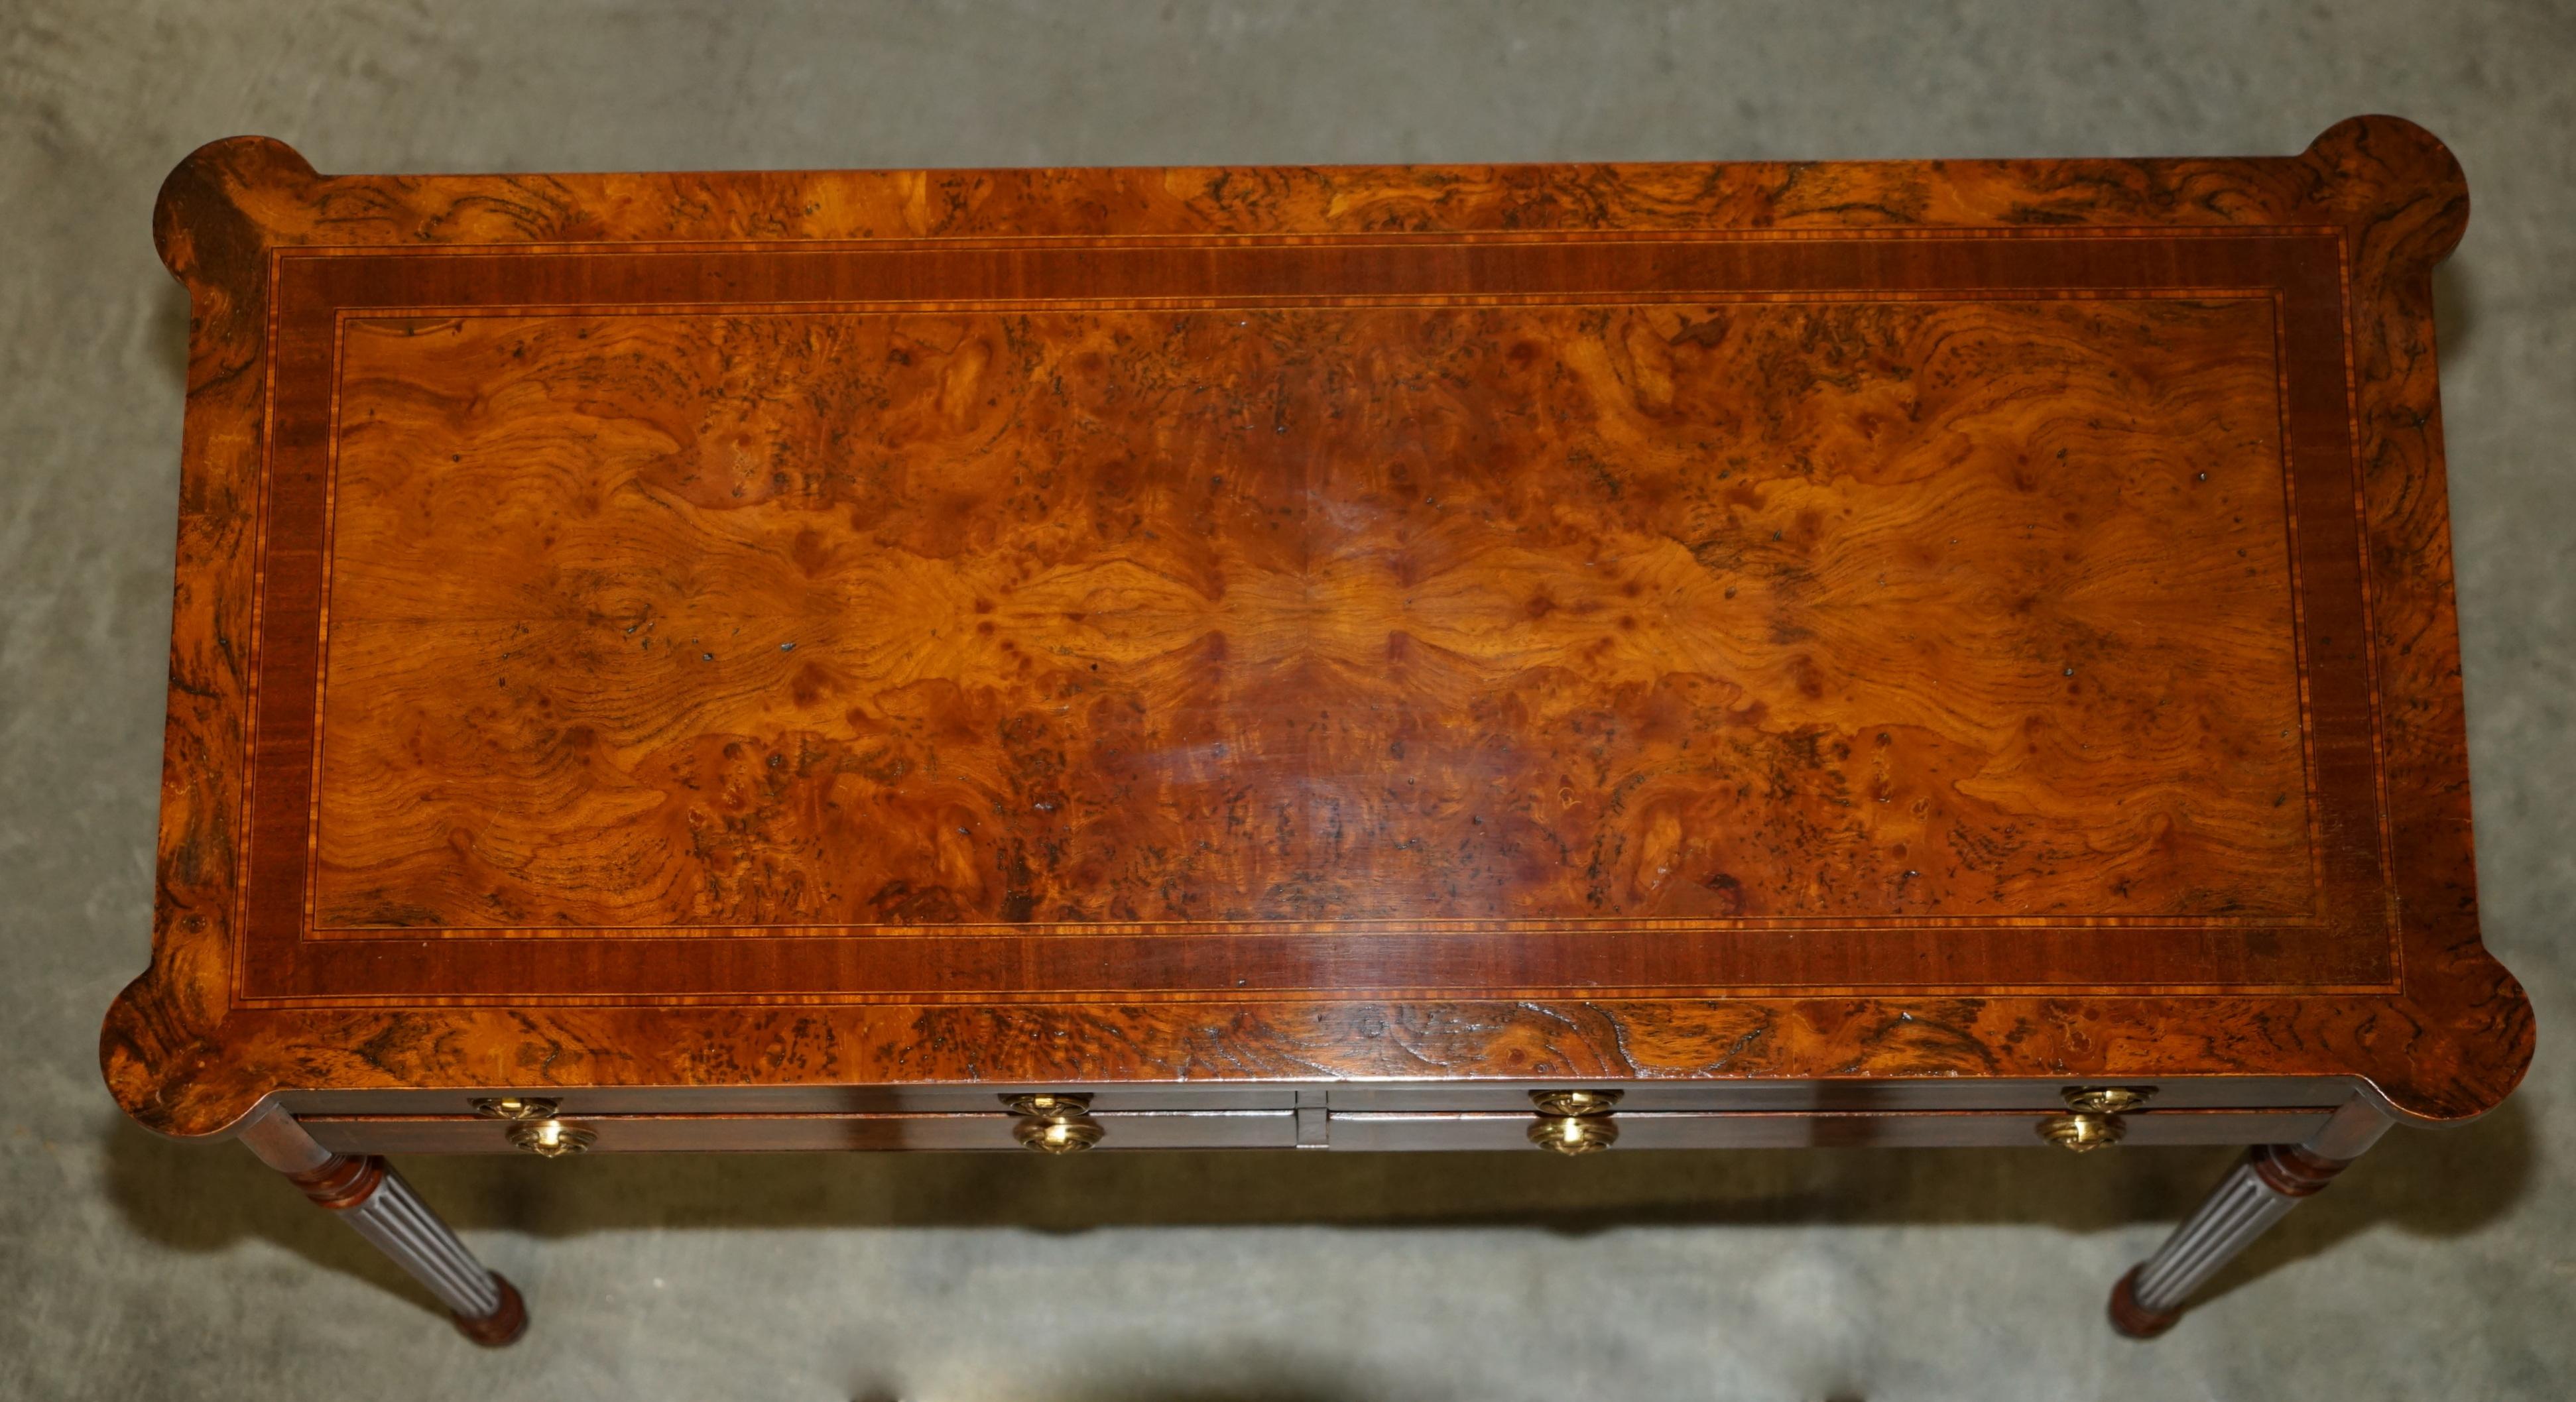 EXQUISITE CIRCA 1920 BURR ELM & SATiNWOOD FRENCH POLISHED RESTORED CONSOLE TABLE For Sale 2